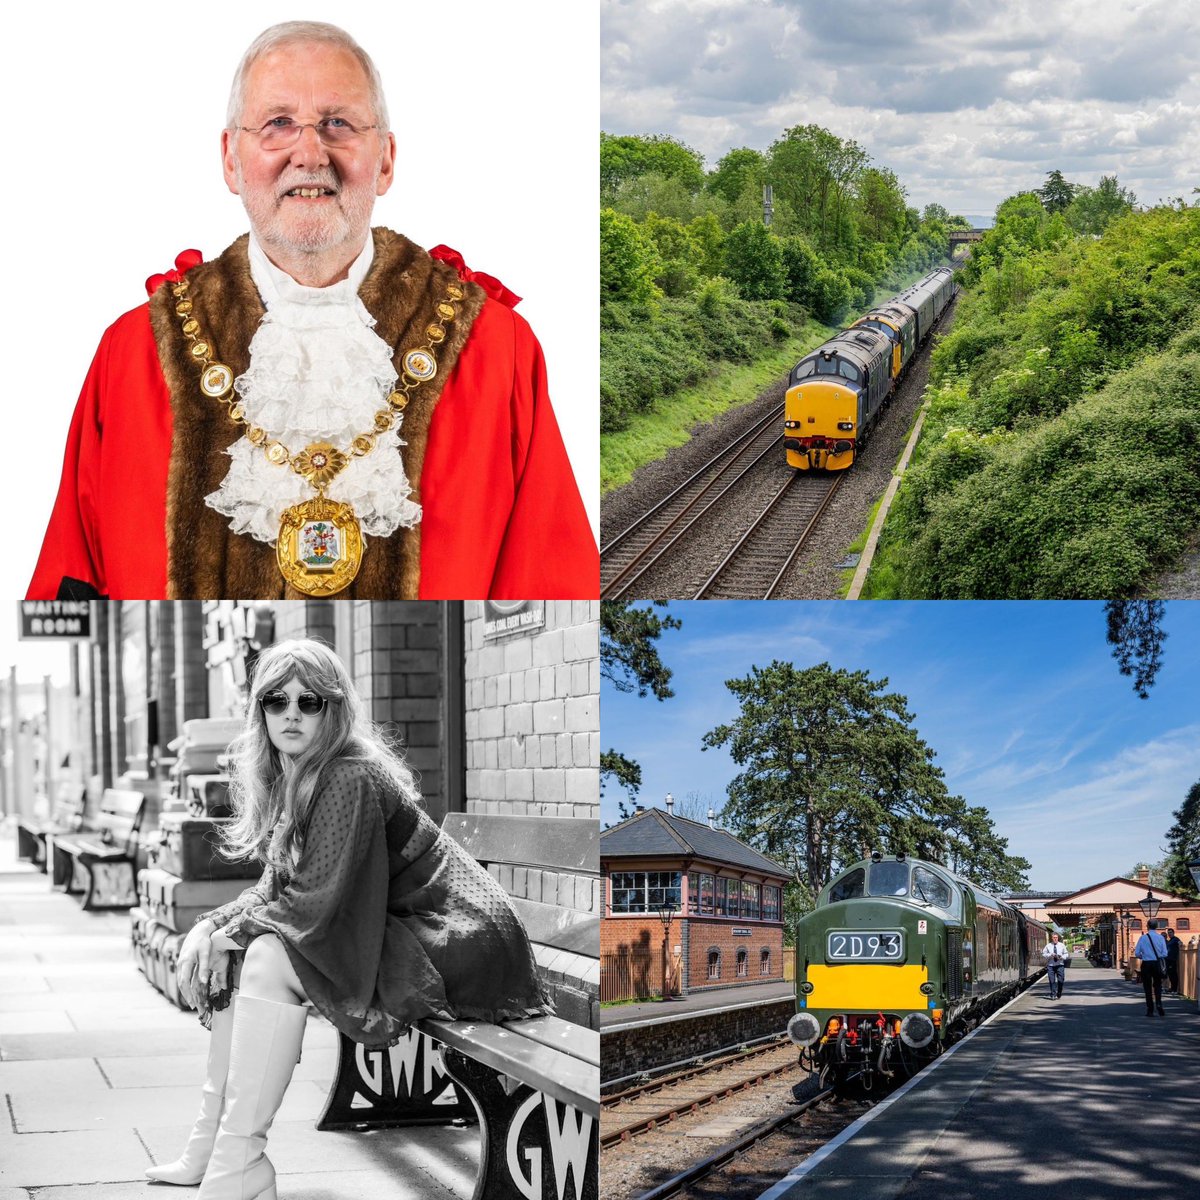 My last fortnight in pictures... It's been another busy one! Railways, steam engines, award ceremonies, fashion shoots and a new Mayor! jackboskett.co.uk